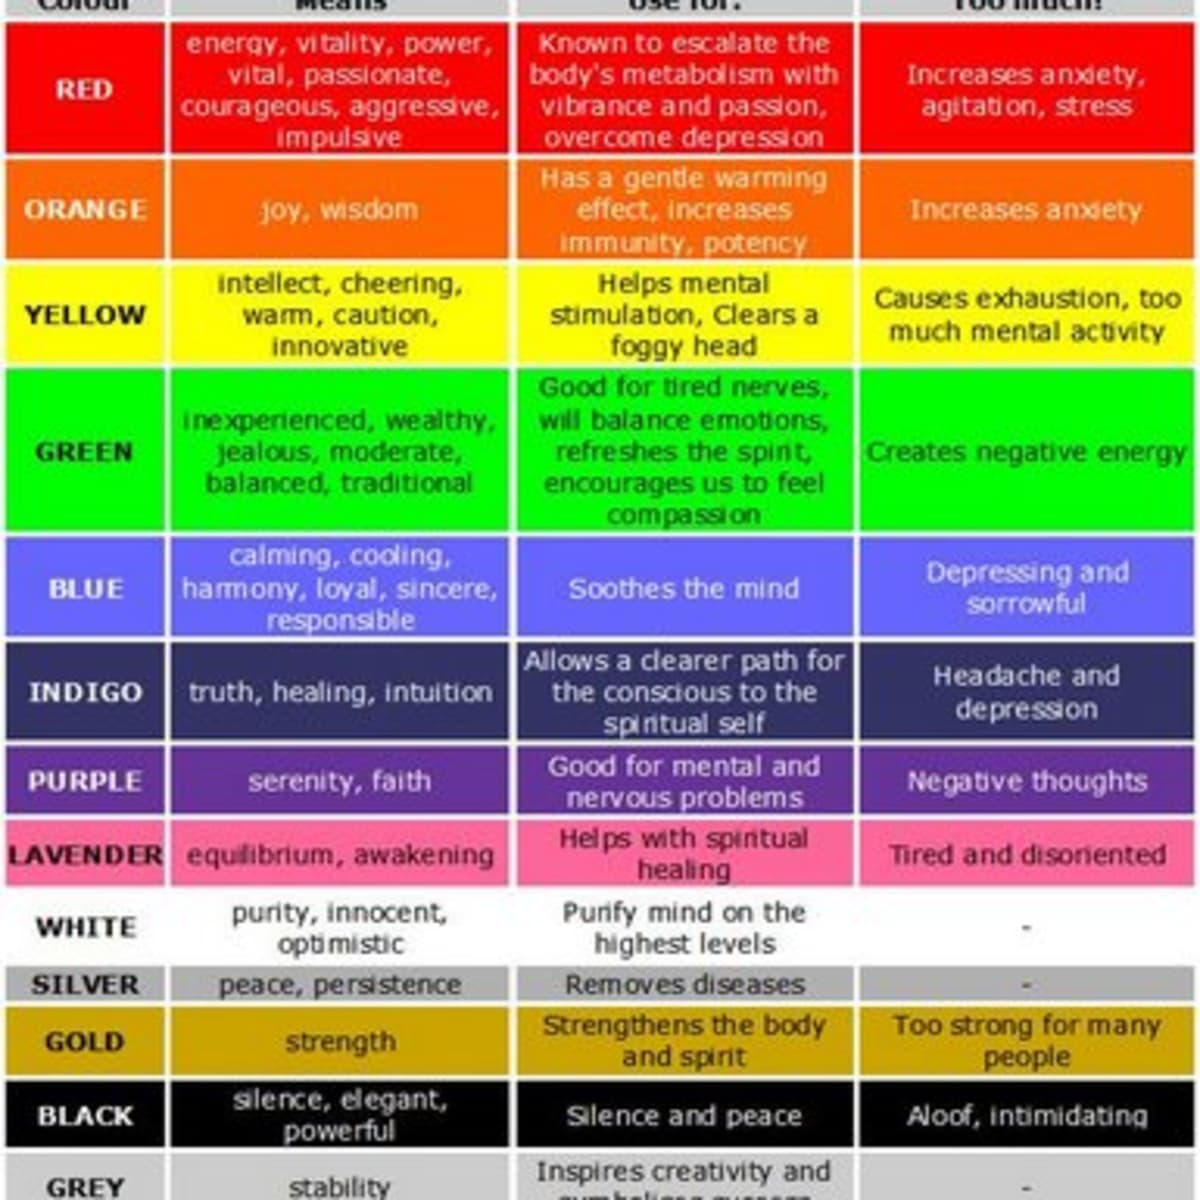 om sagtmodighed plade How Color Affects Our Moods and Health and How to Use Color Therapy to  Improve Every Aspect of Your Life - HubPages